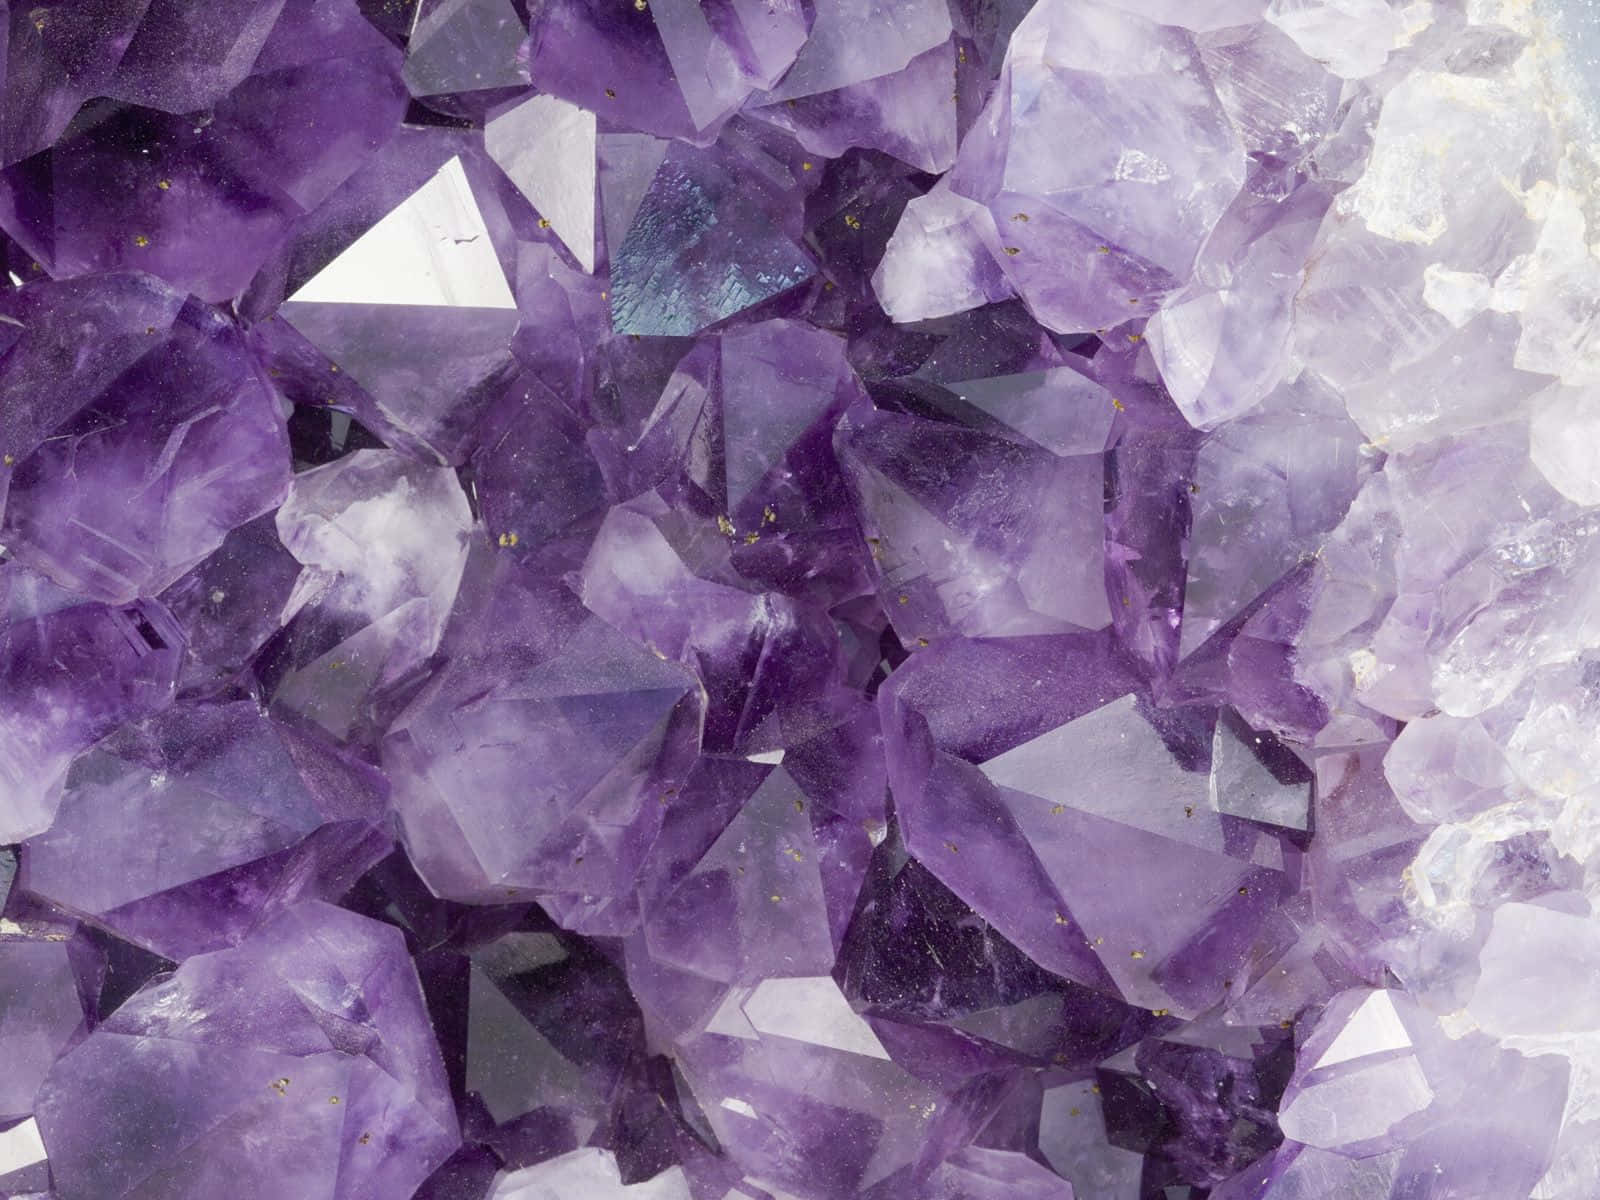 Crystal Wallpaper Background With Sparkling Green Purple Wallpaper Image  For Free Download  Pngtree